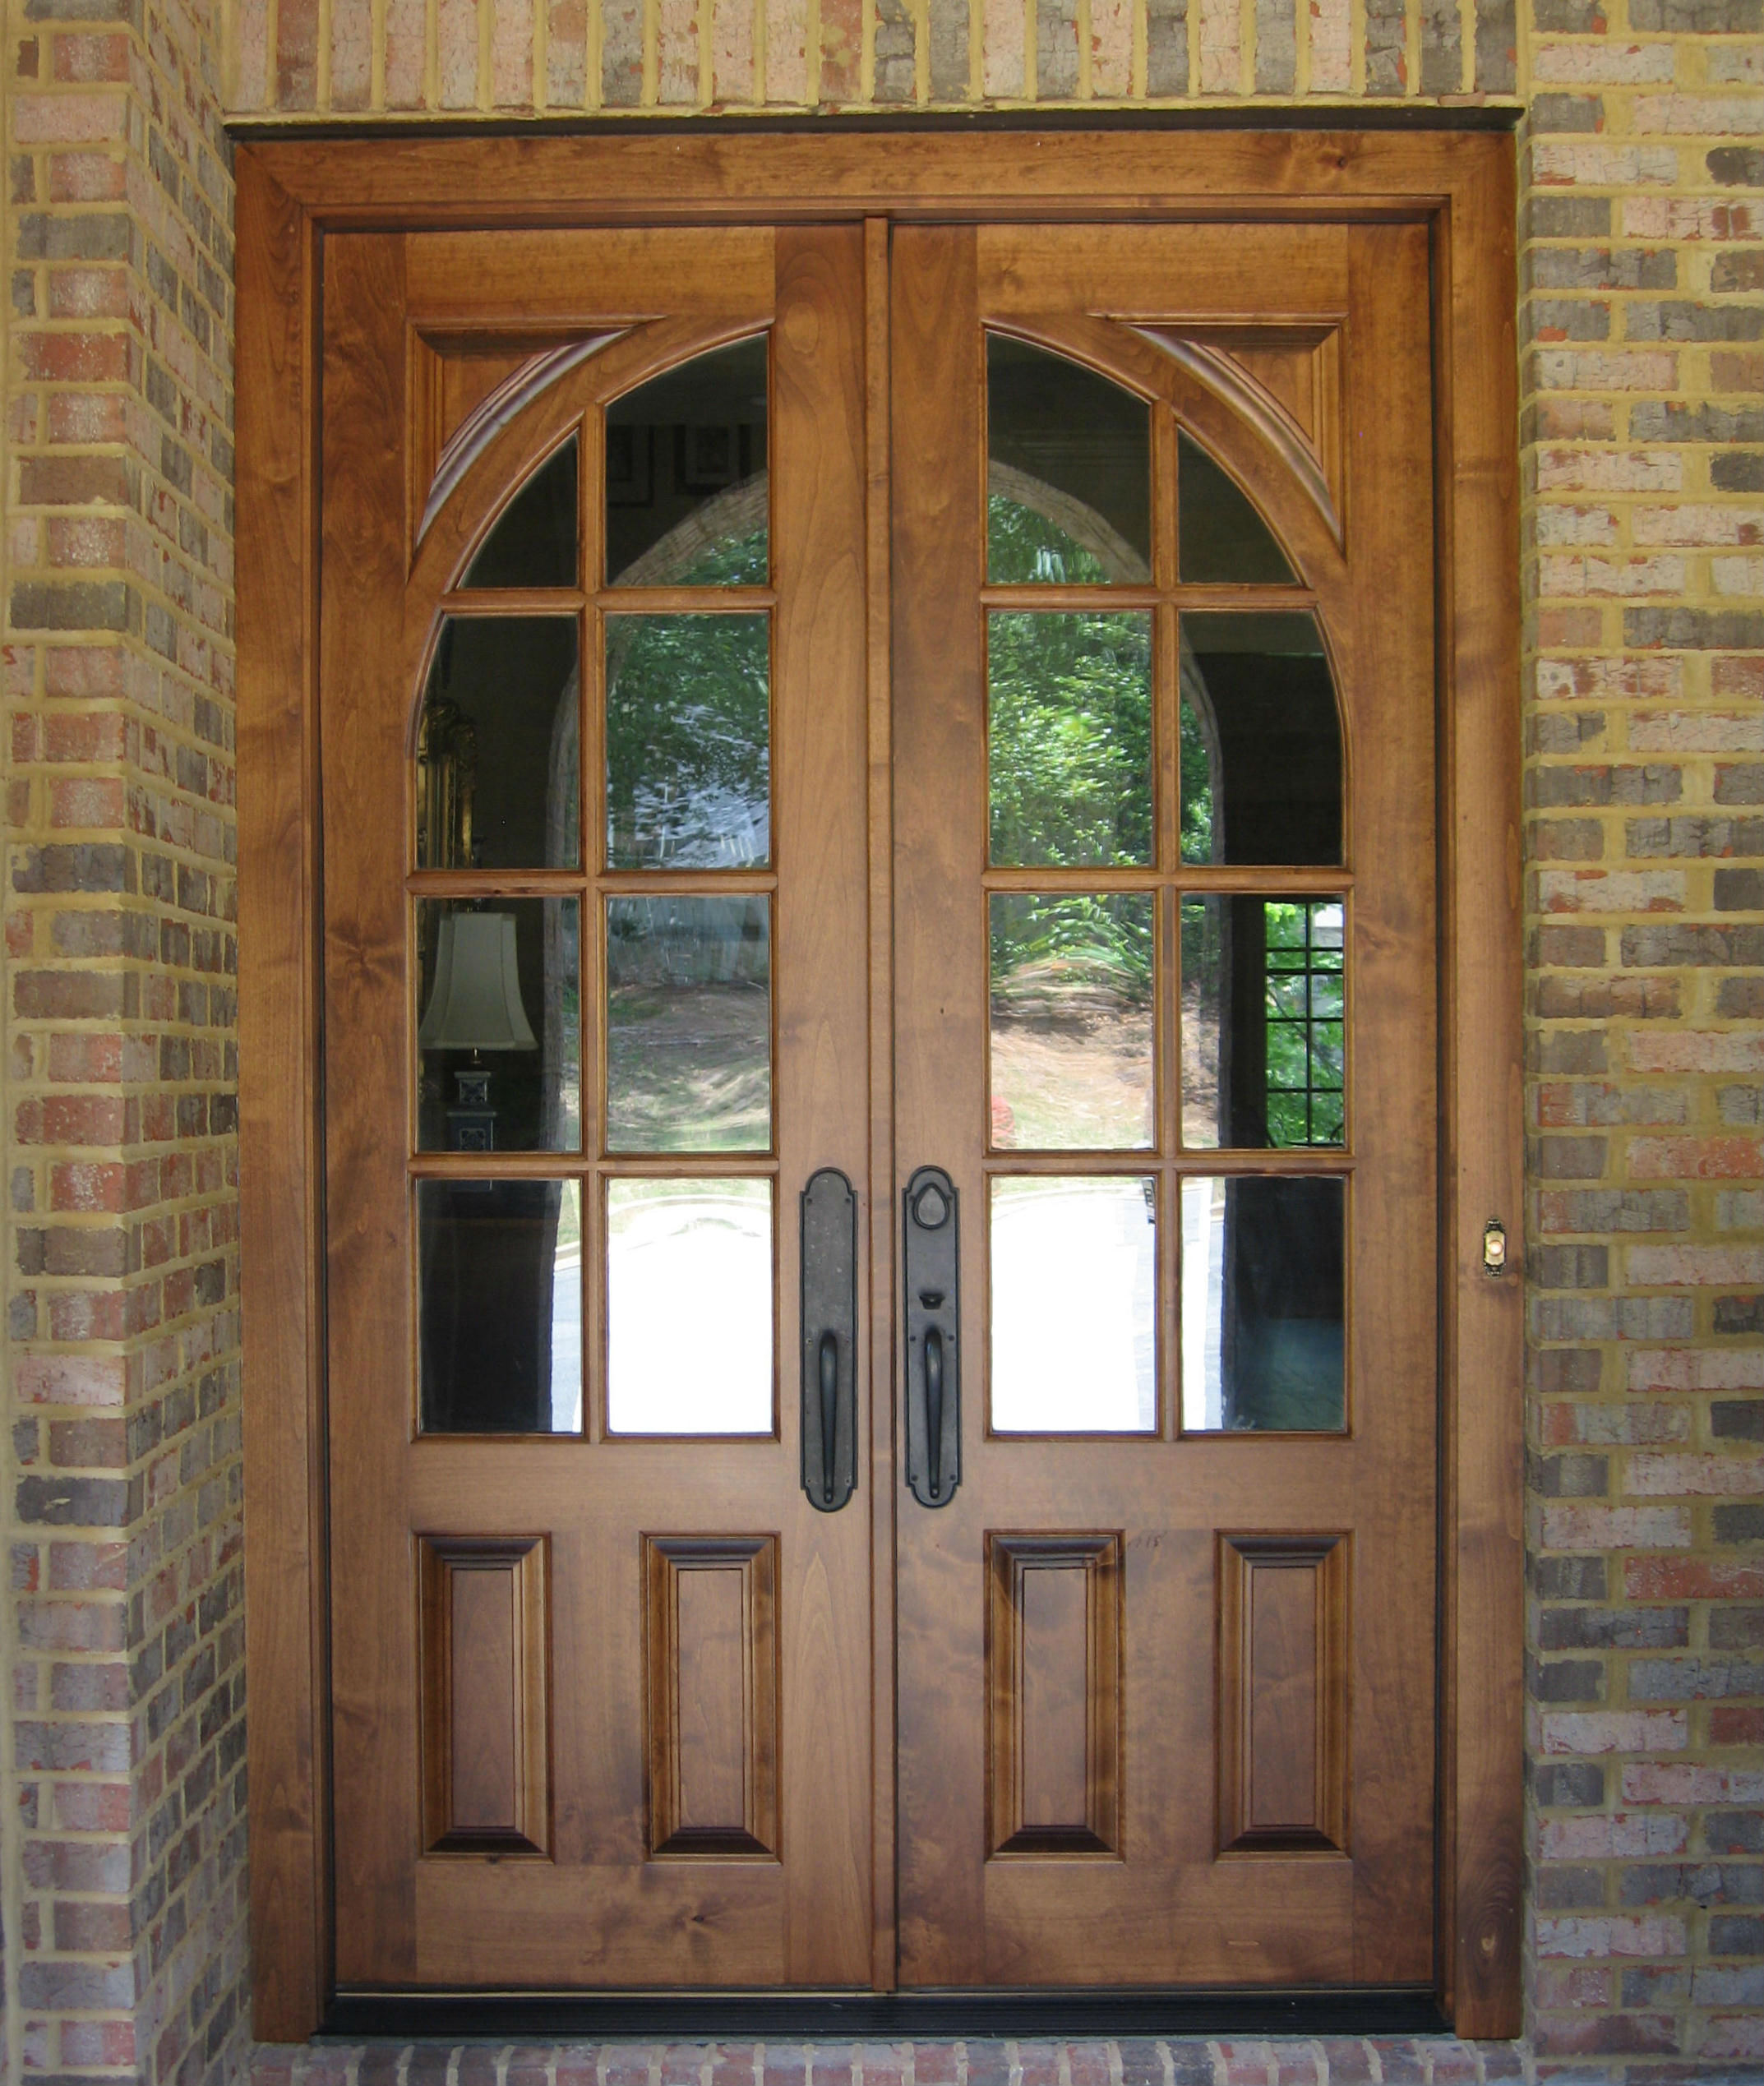 22 facts to know about 8 foot french doors exterior before buying ...